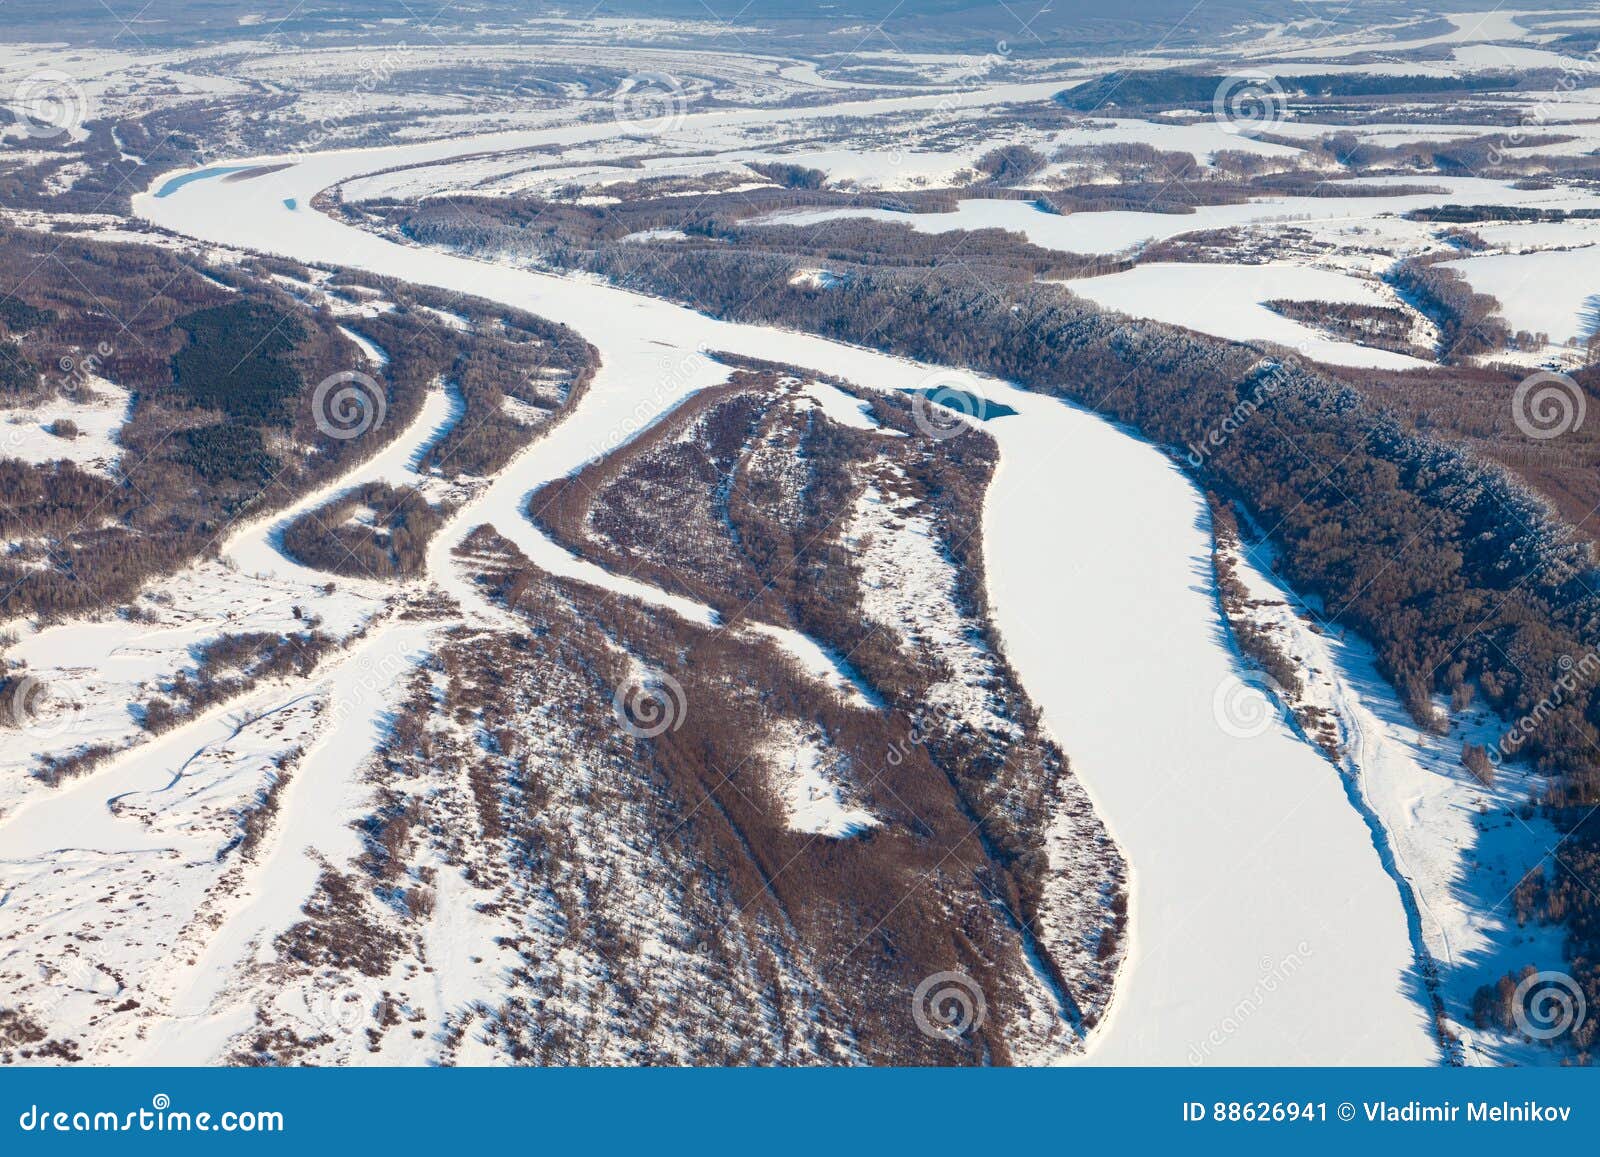 Oka River Russia In Winter Top View Stock Image Image Of